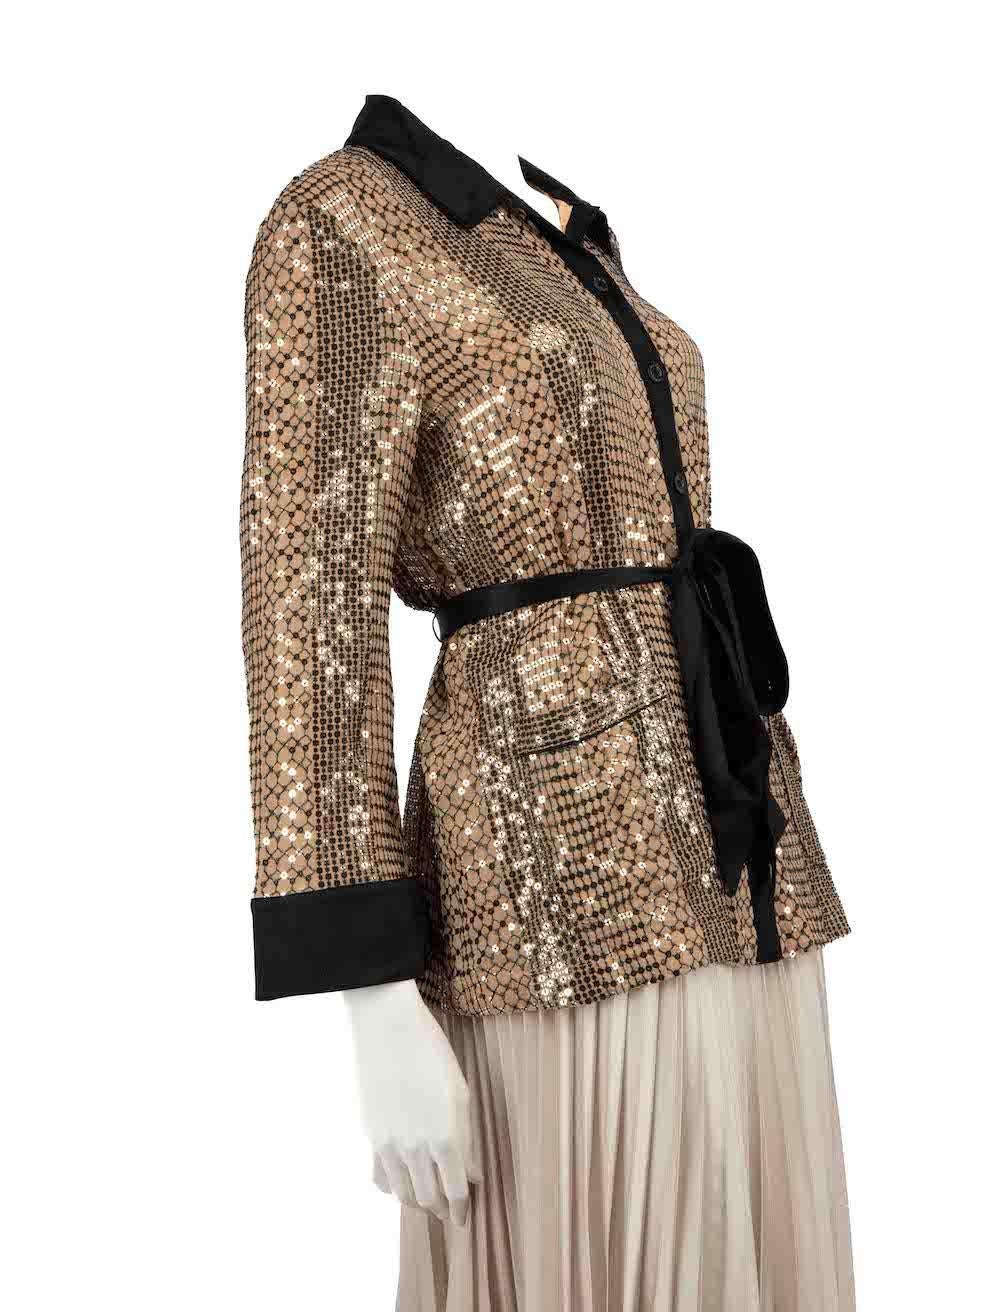 CONDITION is Very good. Minimal wear to shirt is evident. The left belt loop has come undone on this used Temperley London designer resale item.
 
 
 
 Details
 
 
 Brown
 
 Viscose
 
 Shirt
 
 Sequin embellished
 
 Black embroidery
 
 Black silk